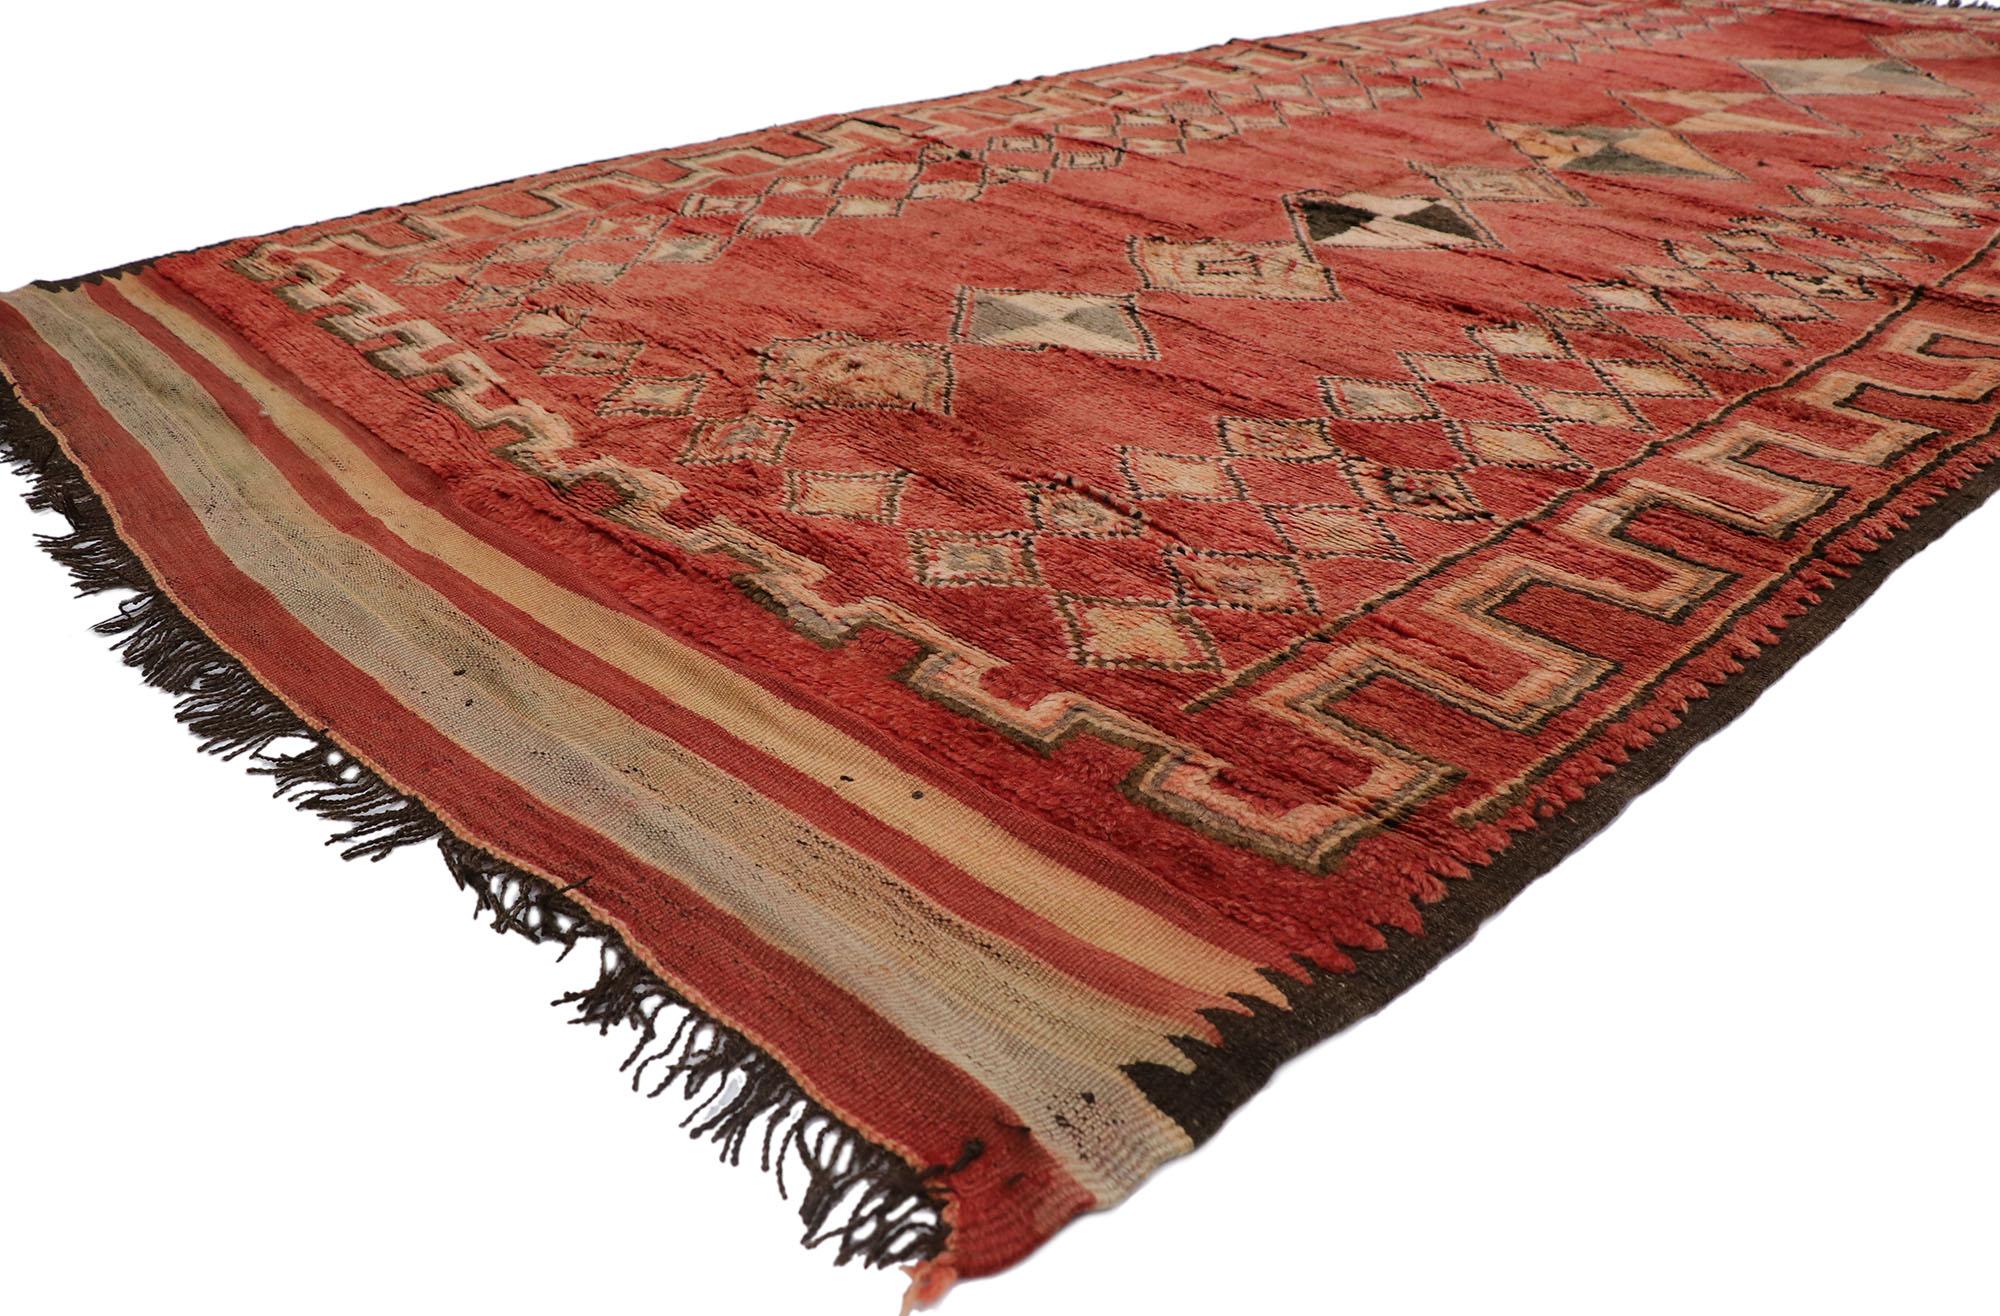 21332 Vintage Red Taznakht Moroccan Rug, 05'11 x 13'00. Taznakht rugs originate from the Taznakht region in the High Atlas Mountains of Morocco and are renowned for their vibrant colors, intricate geometric patterns, and profound cultural